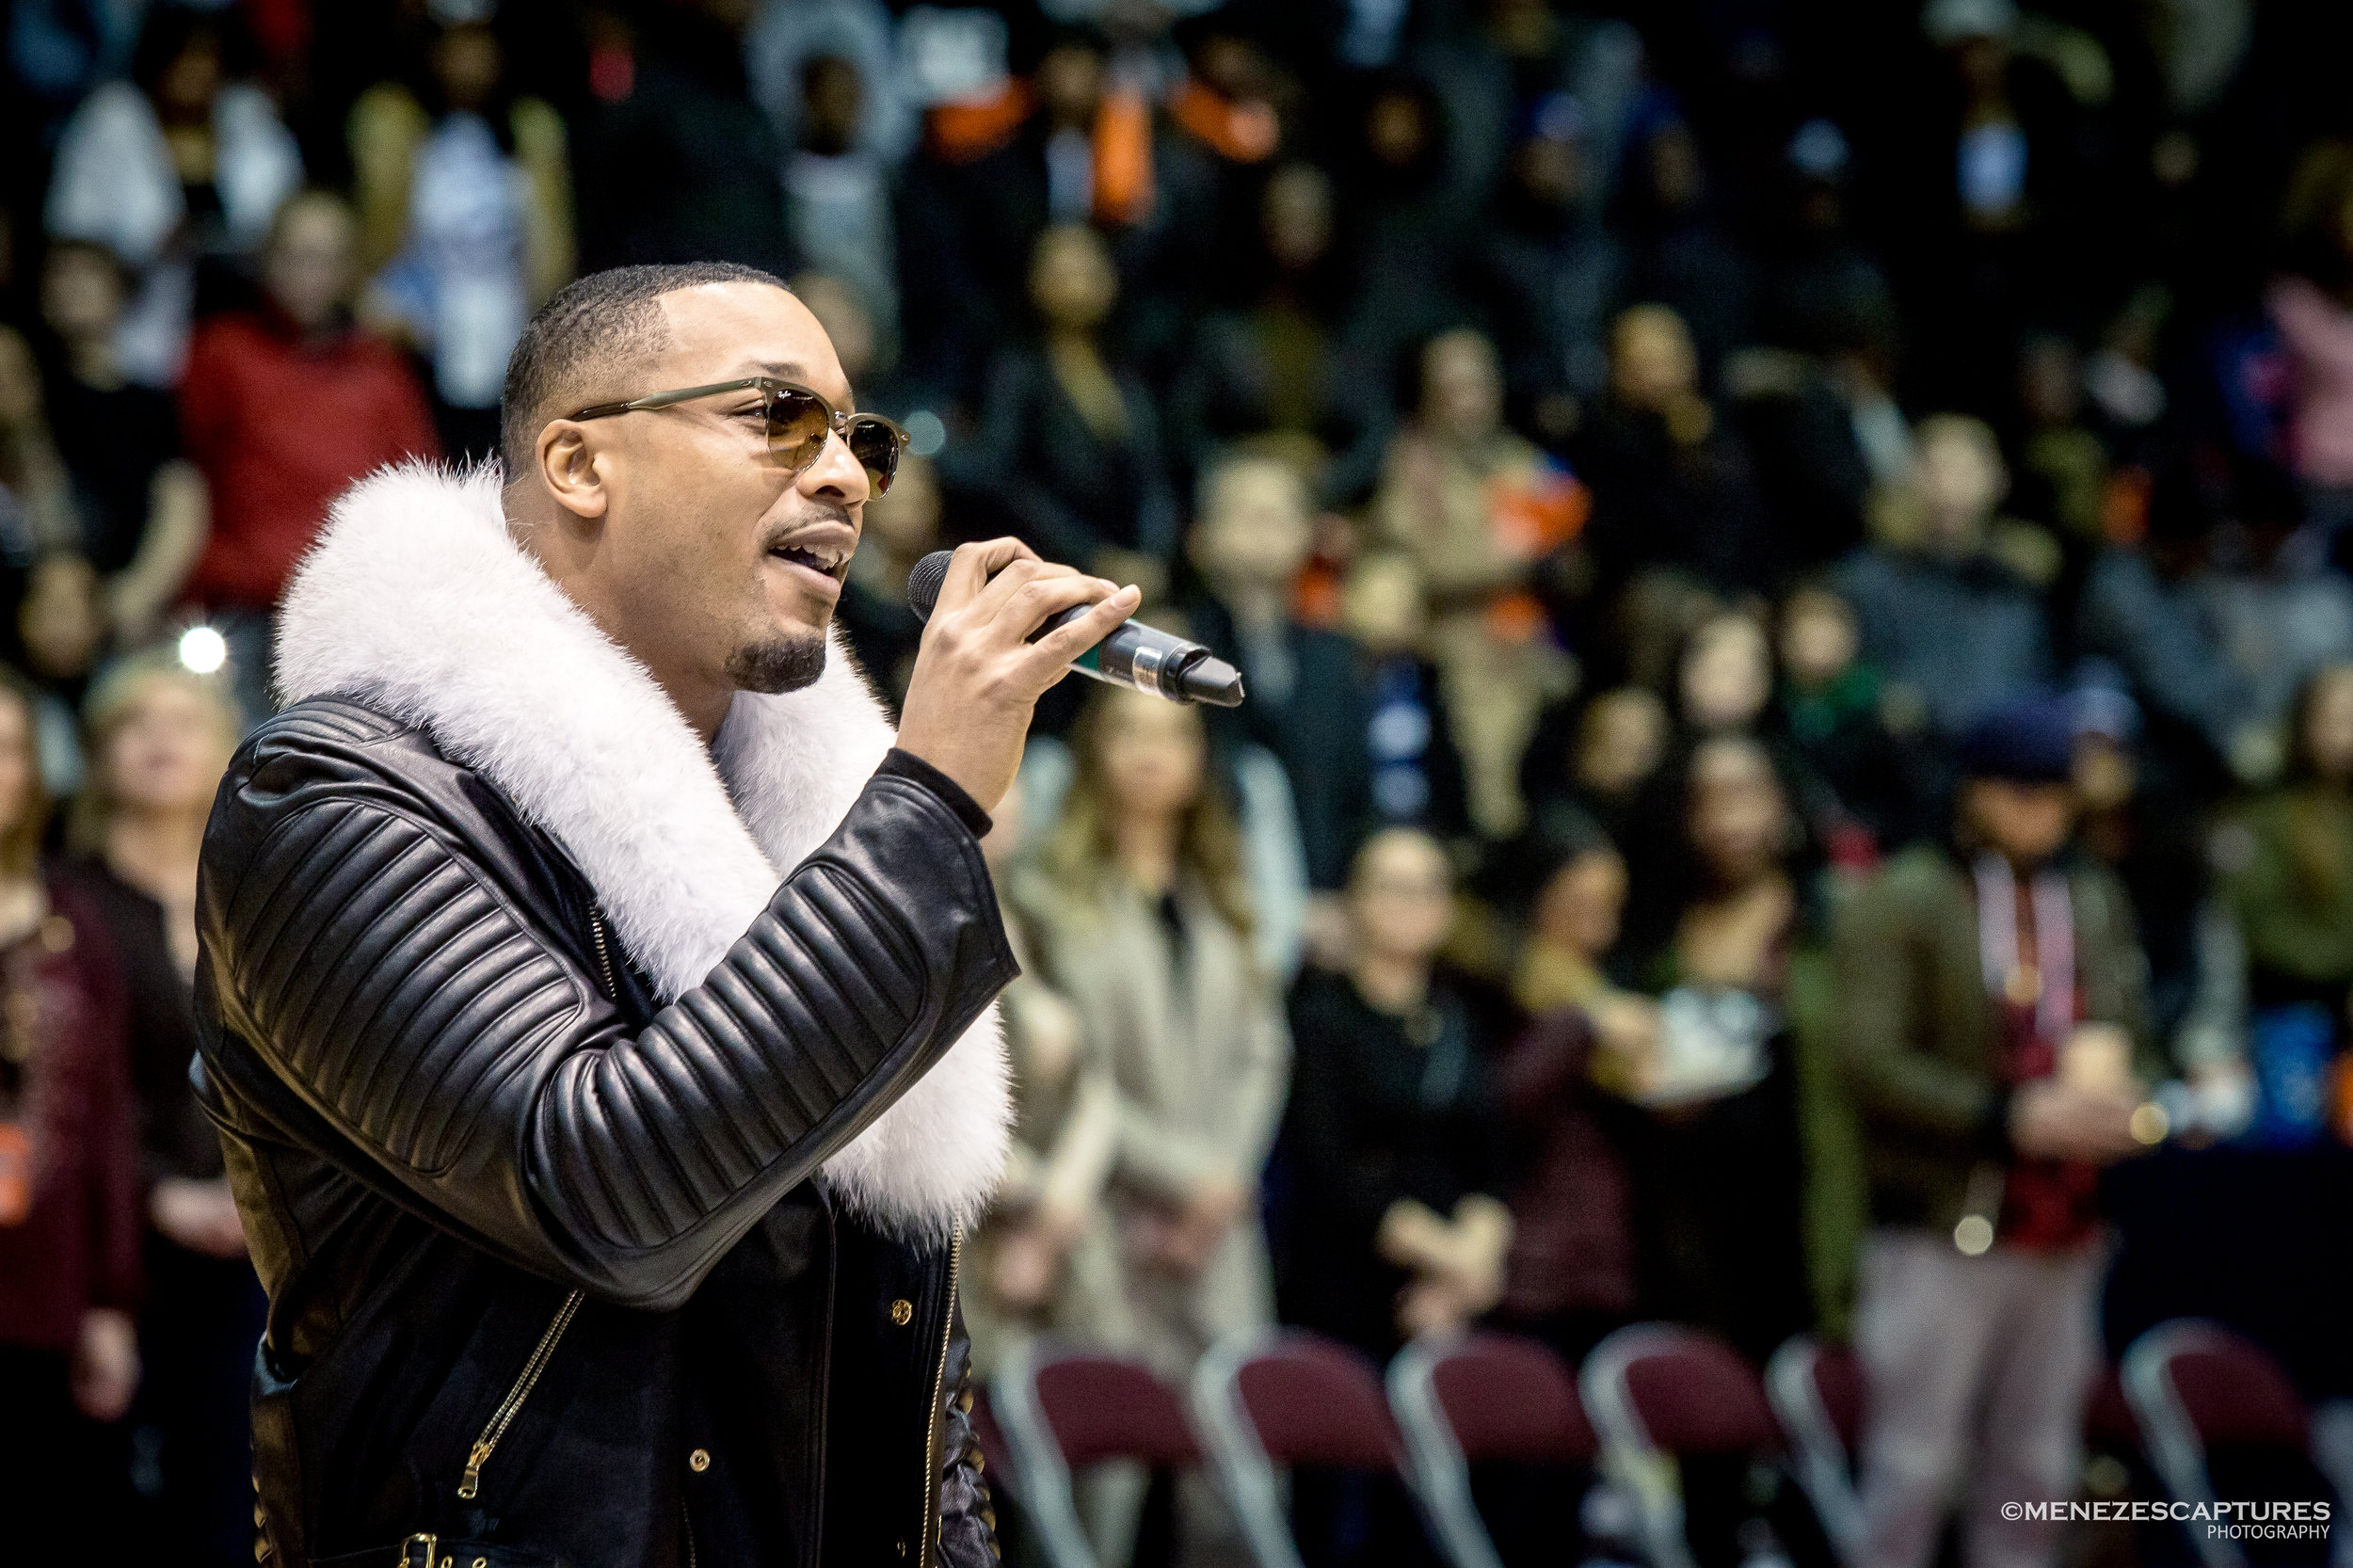 Juno R&B singer Dru performs at the NBA All Star Celebrity Game (2017)